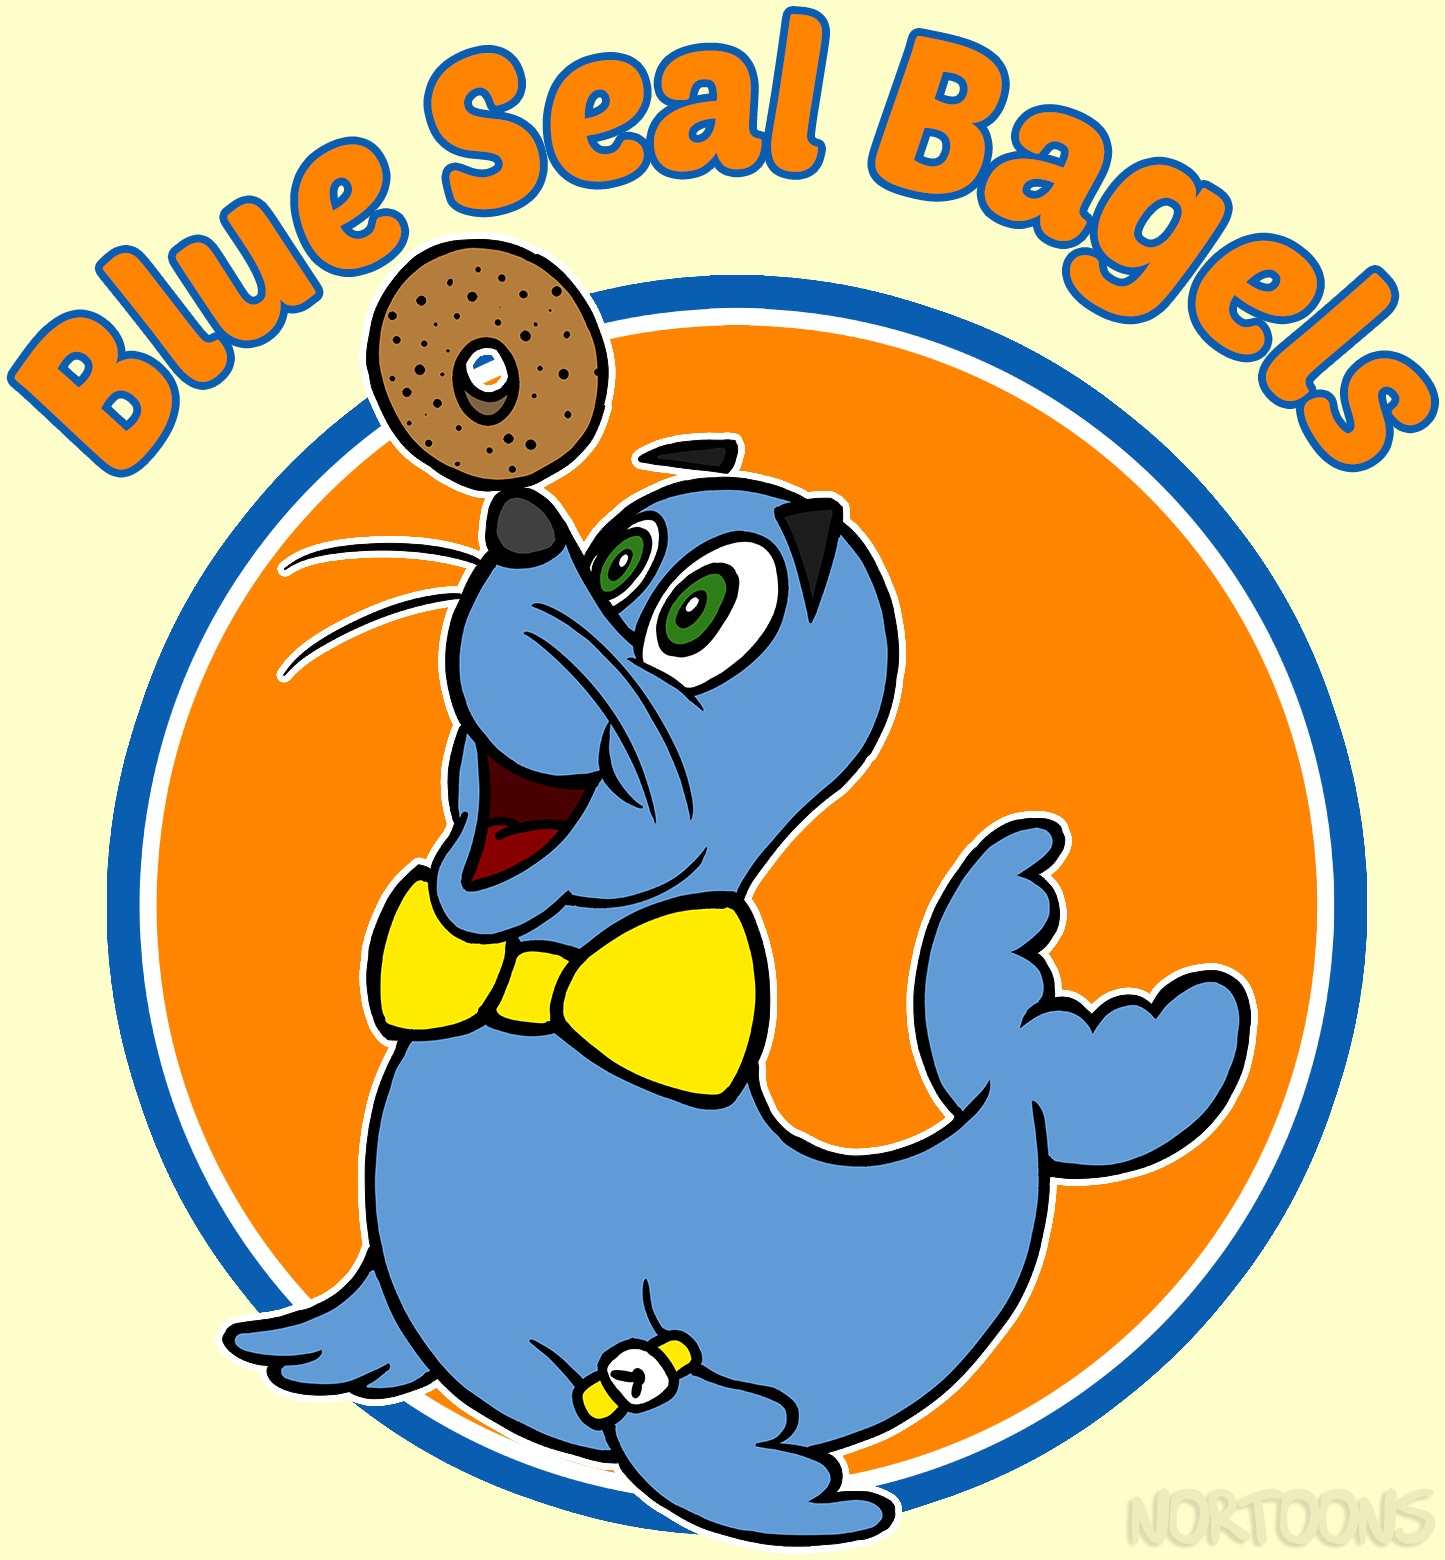 Blue Seal Bagels Logo - Buster the Seal